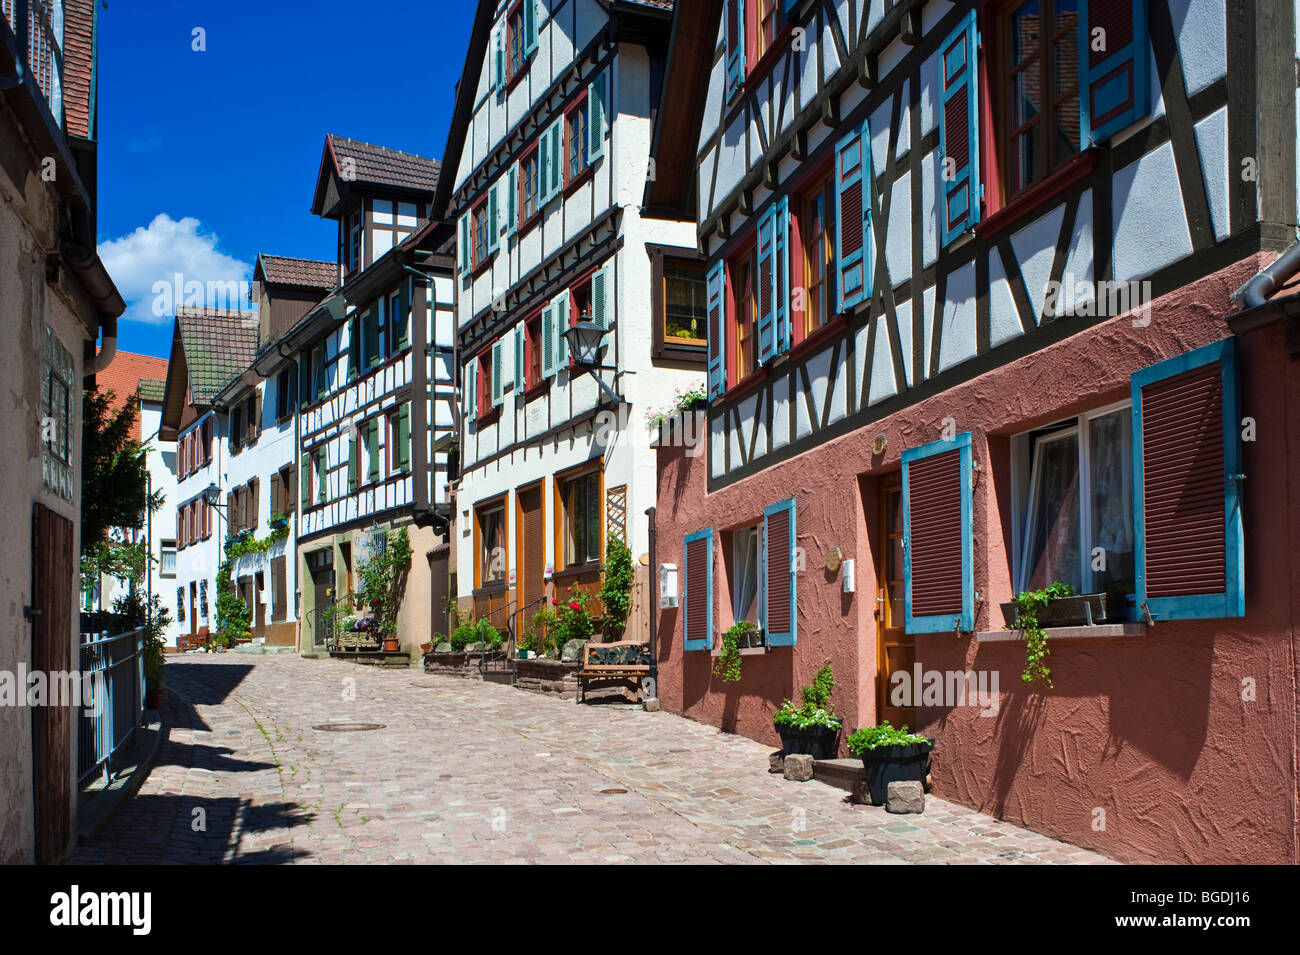 Half timber in the Spitalstrasse street, Schiltach, Black Forest, Baden-Wuerttemberg, Germany, Europe Stock Photo